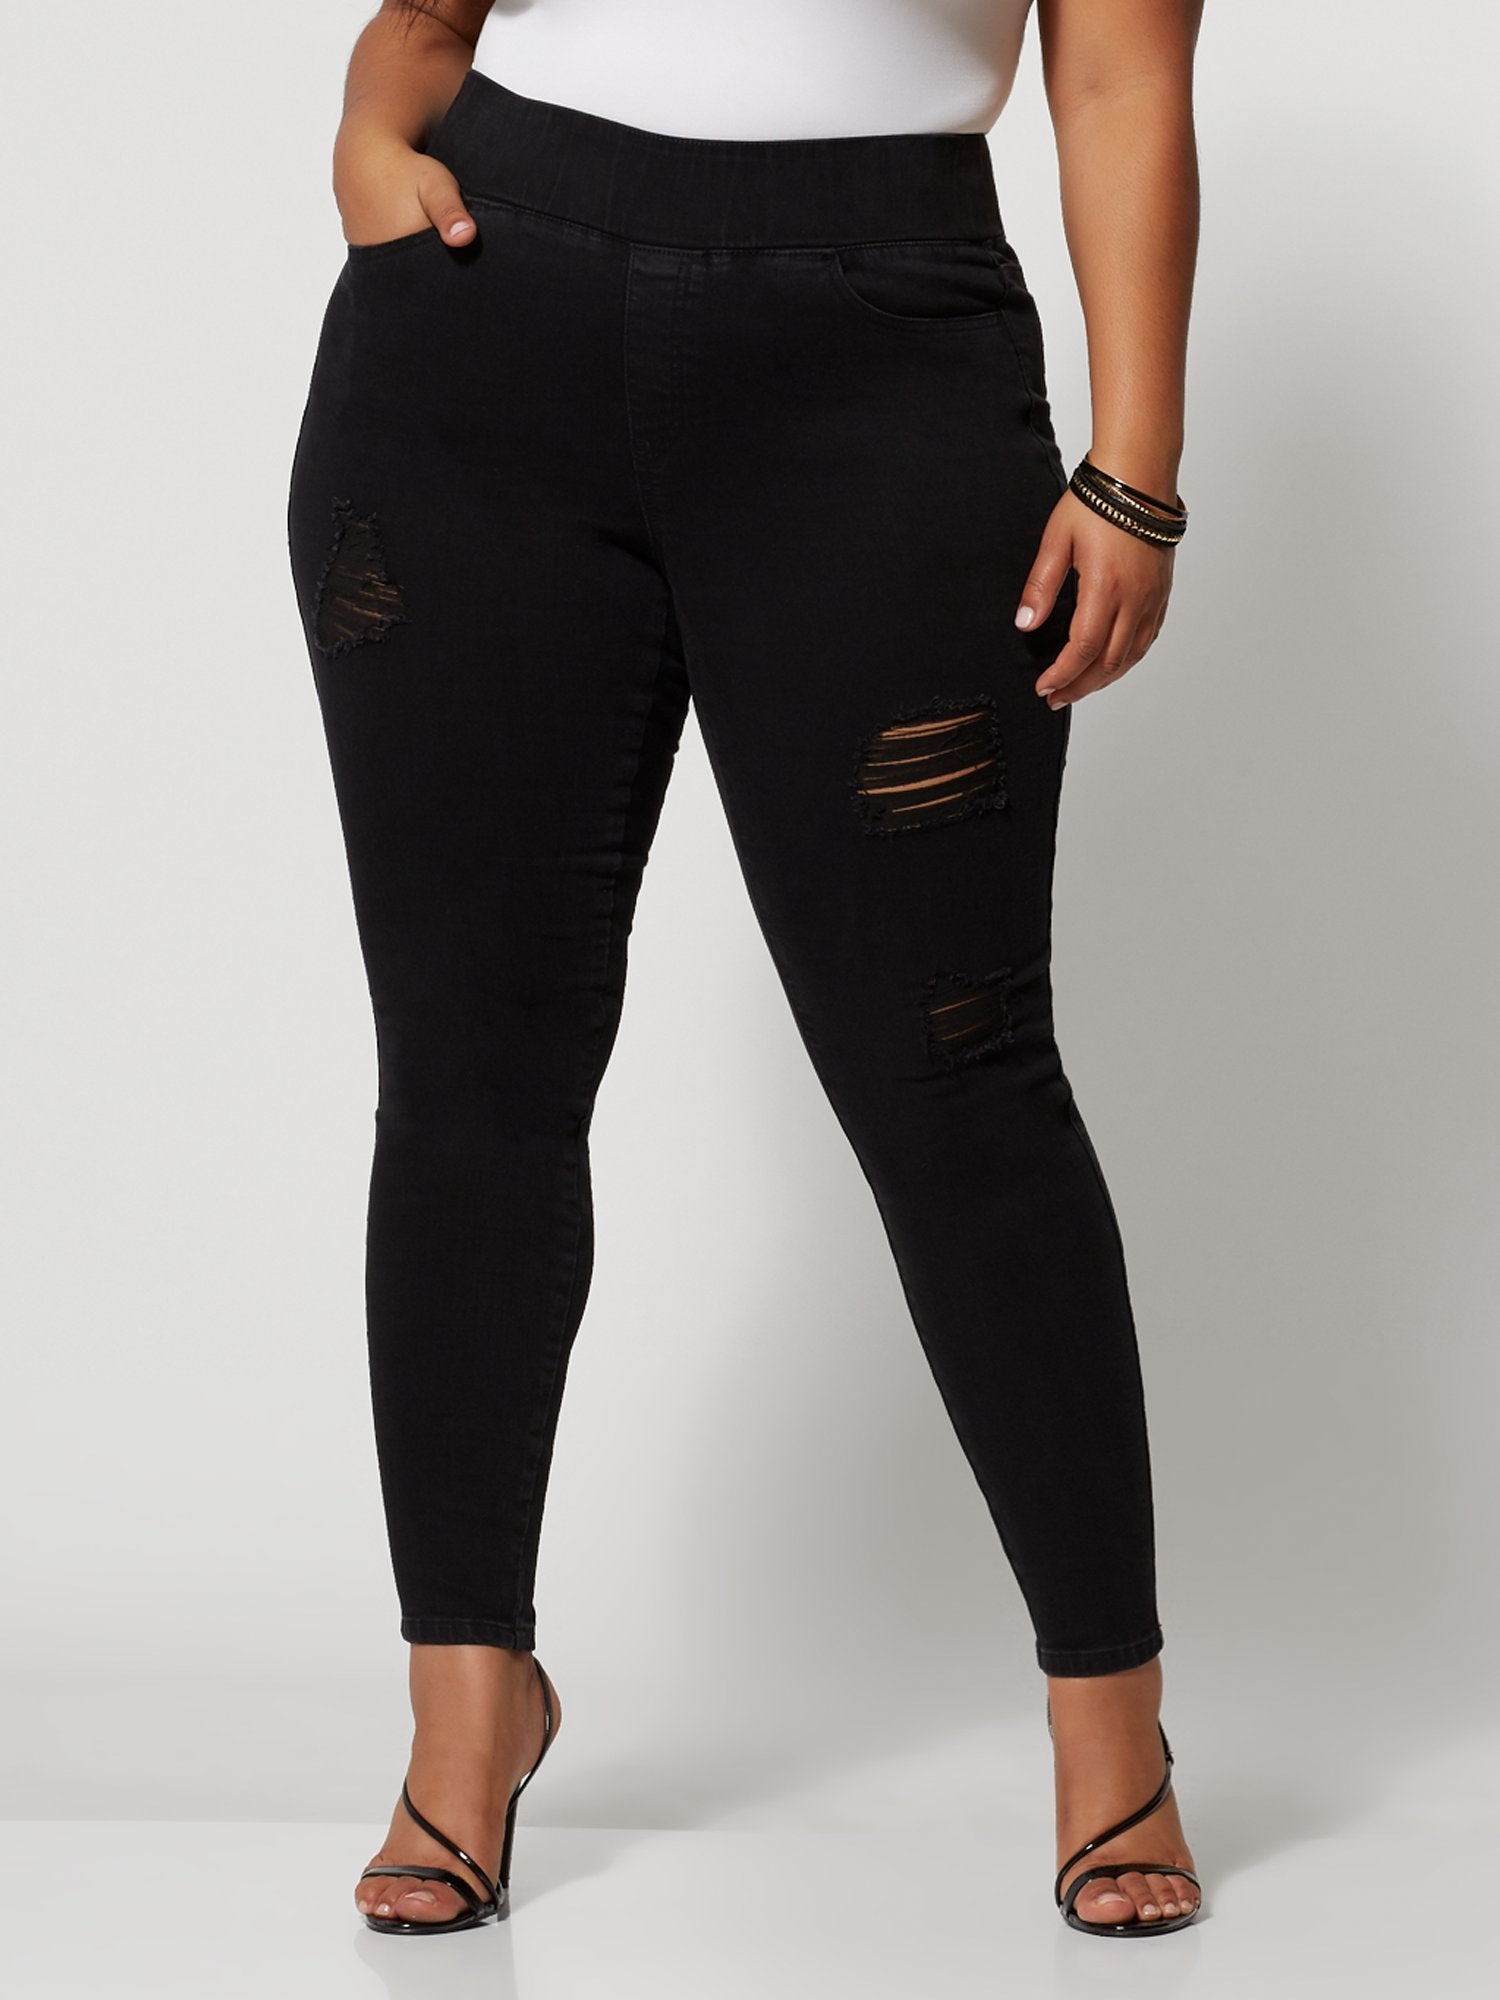 Plus Size Black High-Rise Destructed Jeggings - Tall Inseam